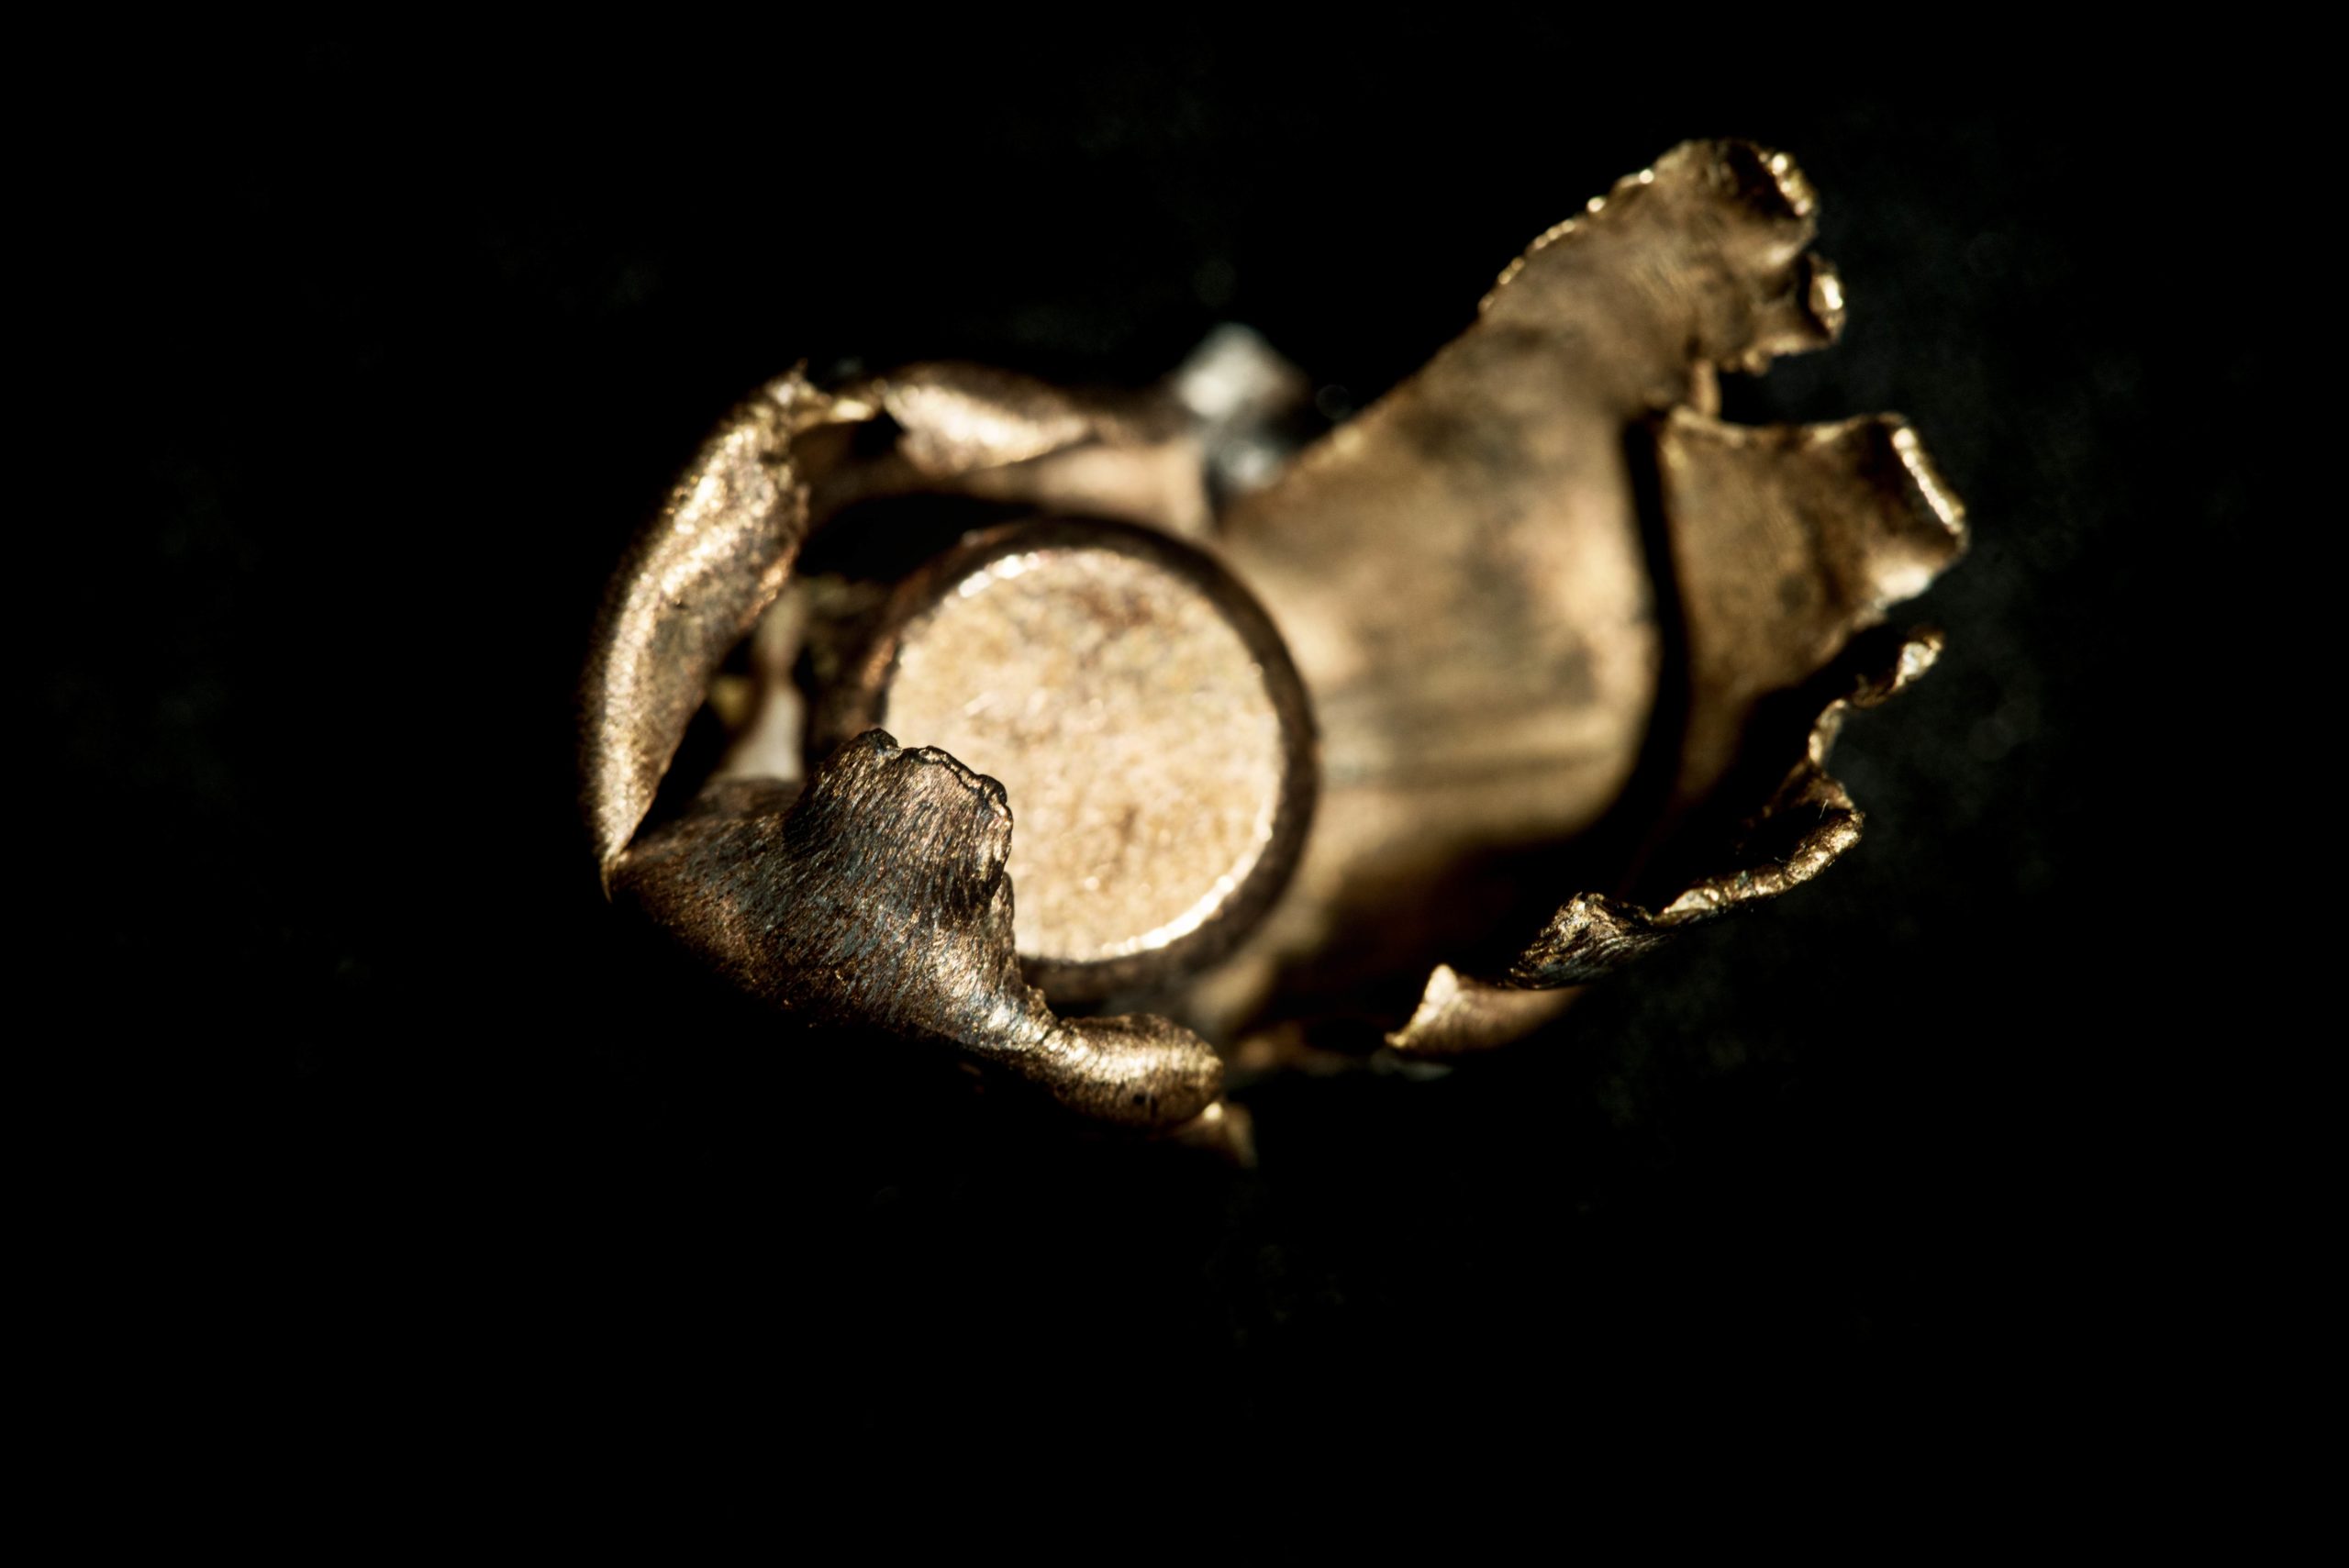 A ruptured metal bullet case in an extreme close up. The torn edges are accentuated by lights reflected on the contoured surface.